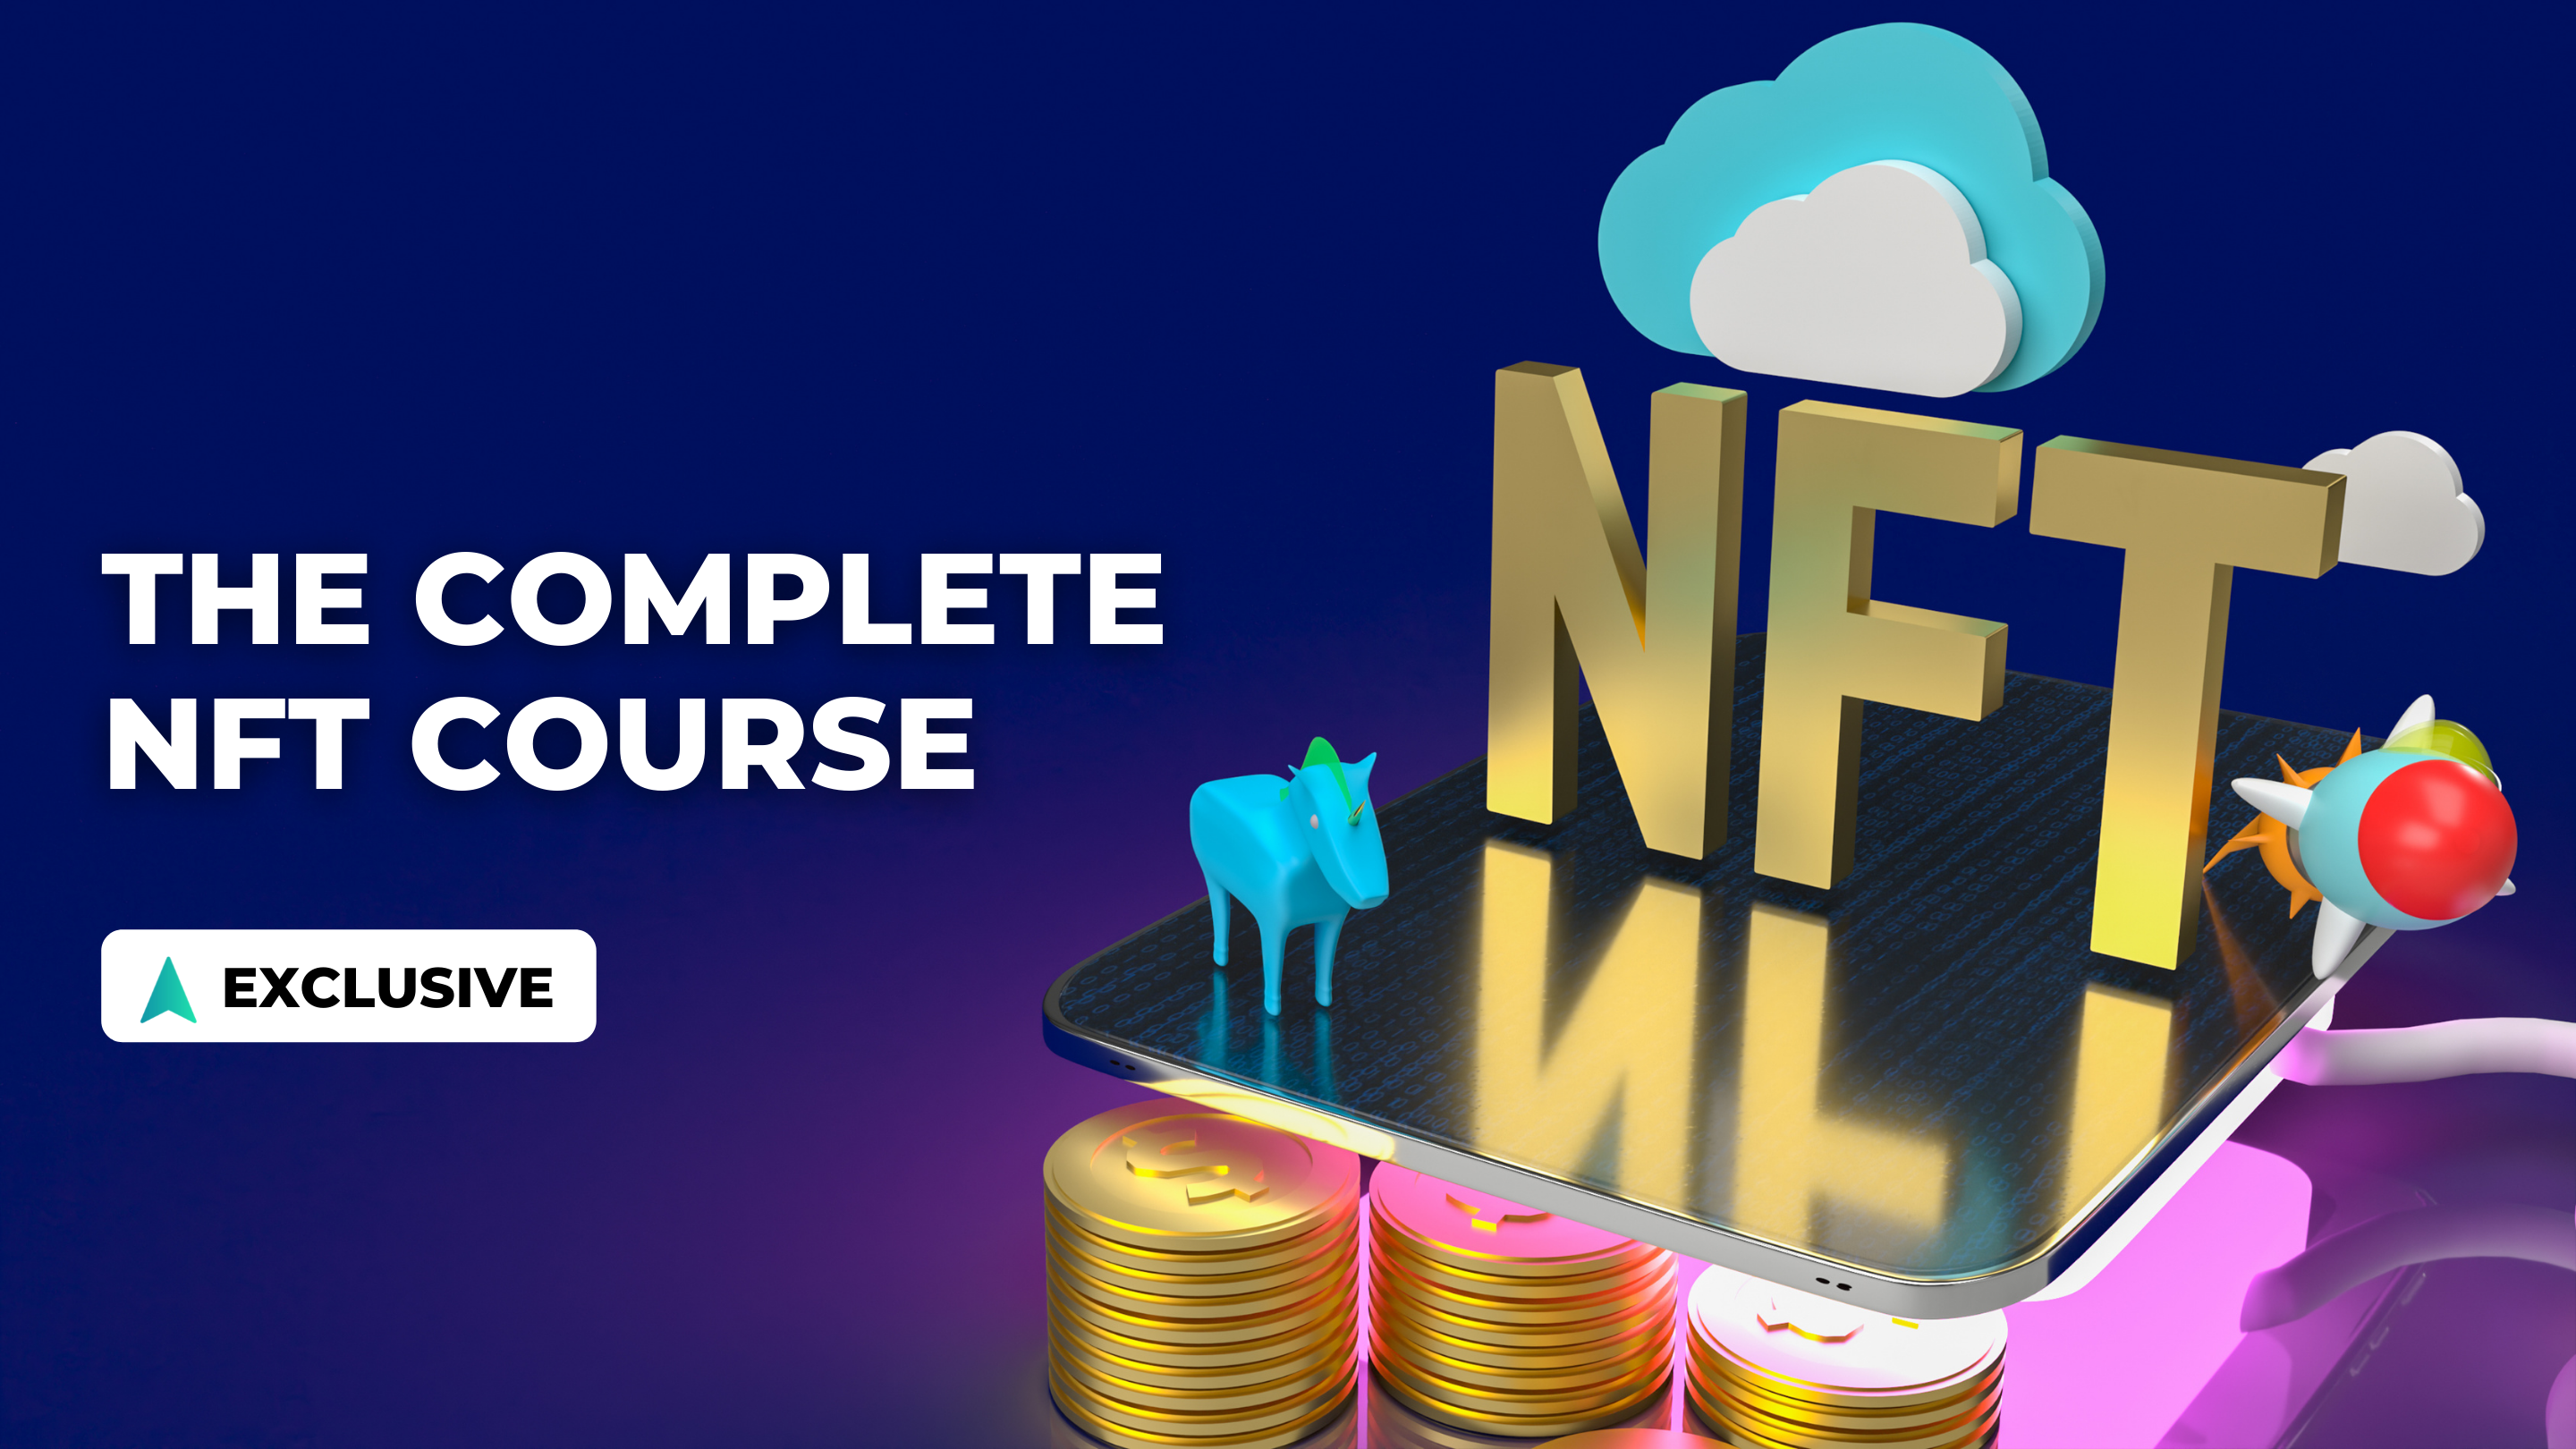 The Complete Stock Trading Course